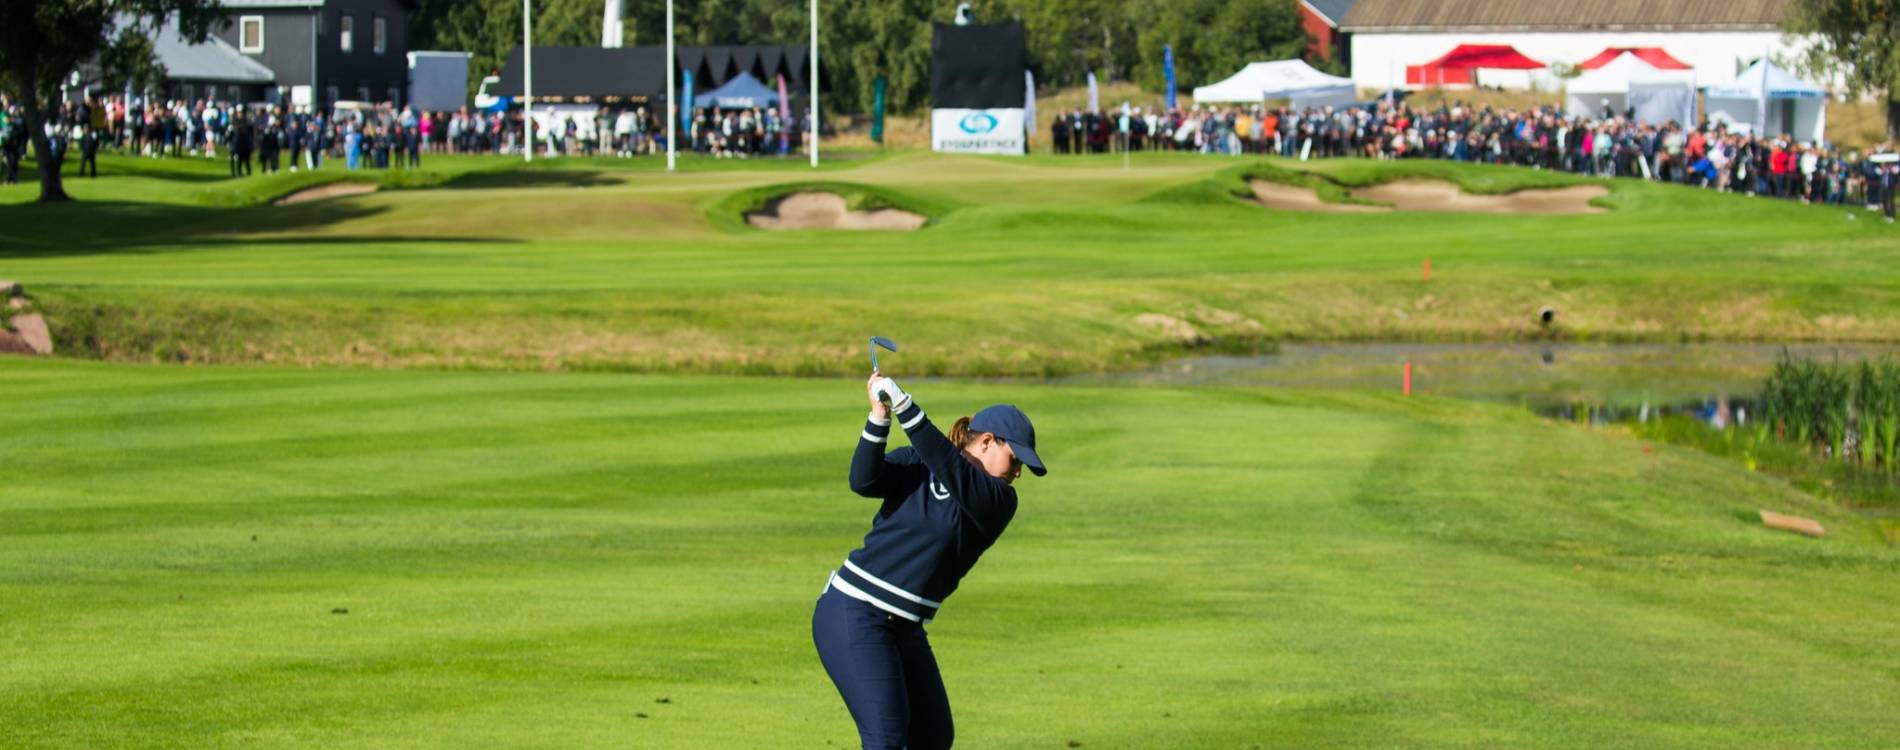 Anne-Charlotte Mora at the Aland 100 Ladies Open (Ladies Finnish Open)